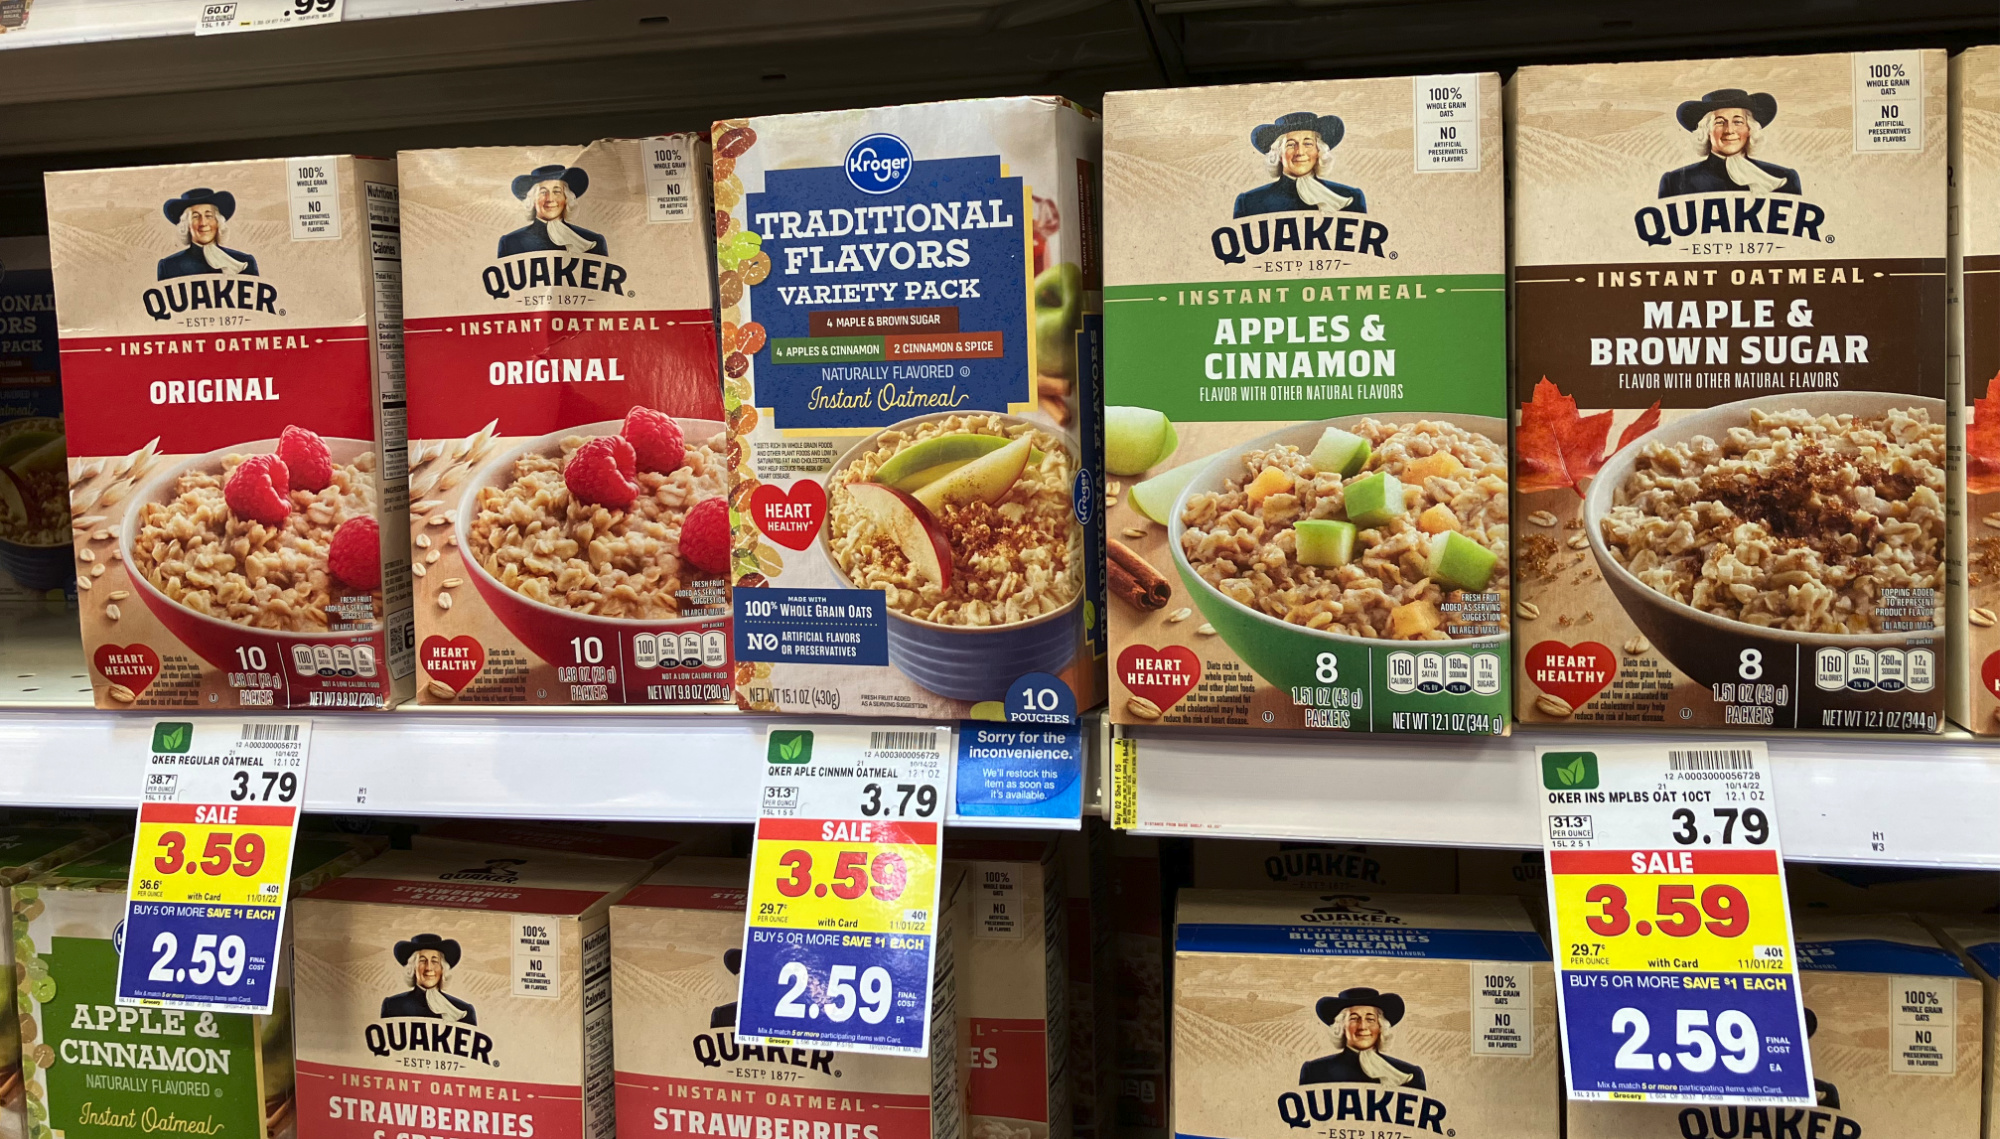 Quaker Oats As Low As $1.99 Per Canister At Kroger (Regular Price $6.79) -  iHeartKroger